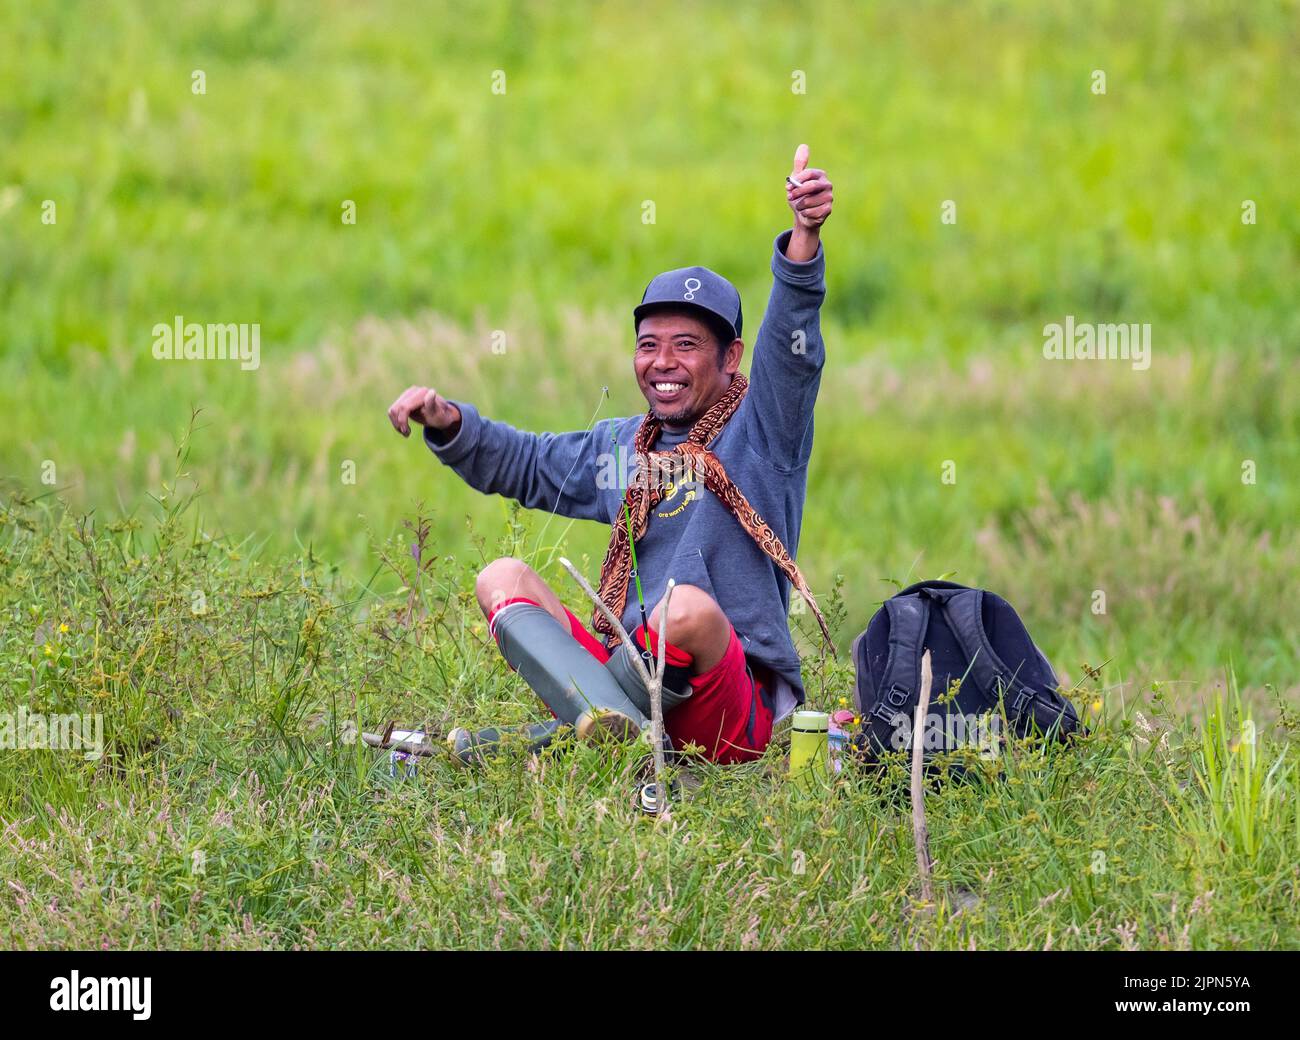 A cheerful middle aged Indonesian man sitting on grass with his thumb up. Sulawesi, Indonesia. Stock Photo